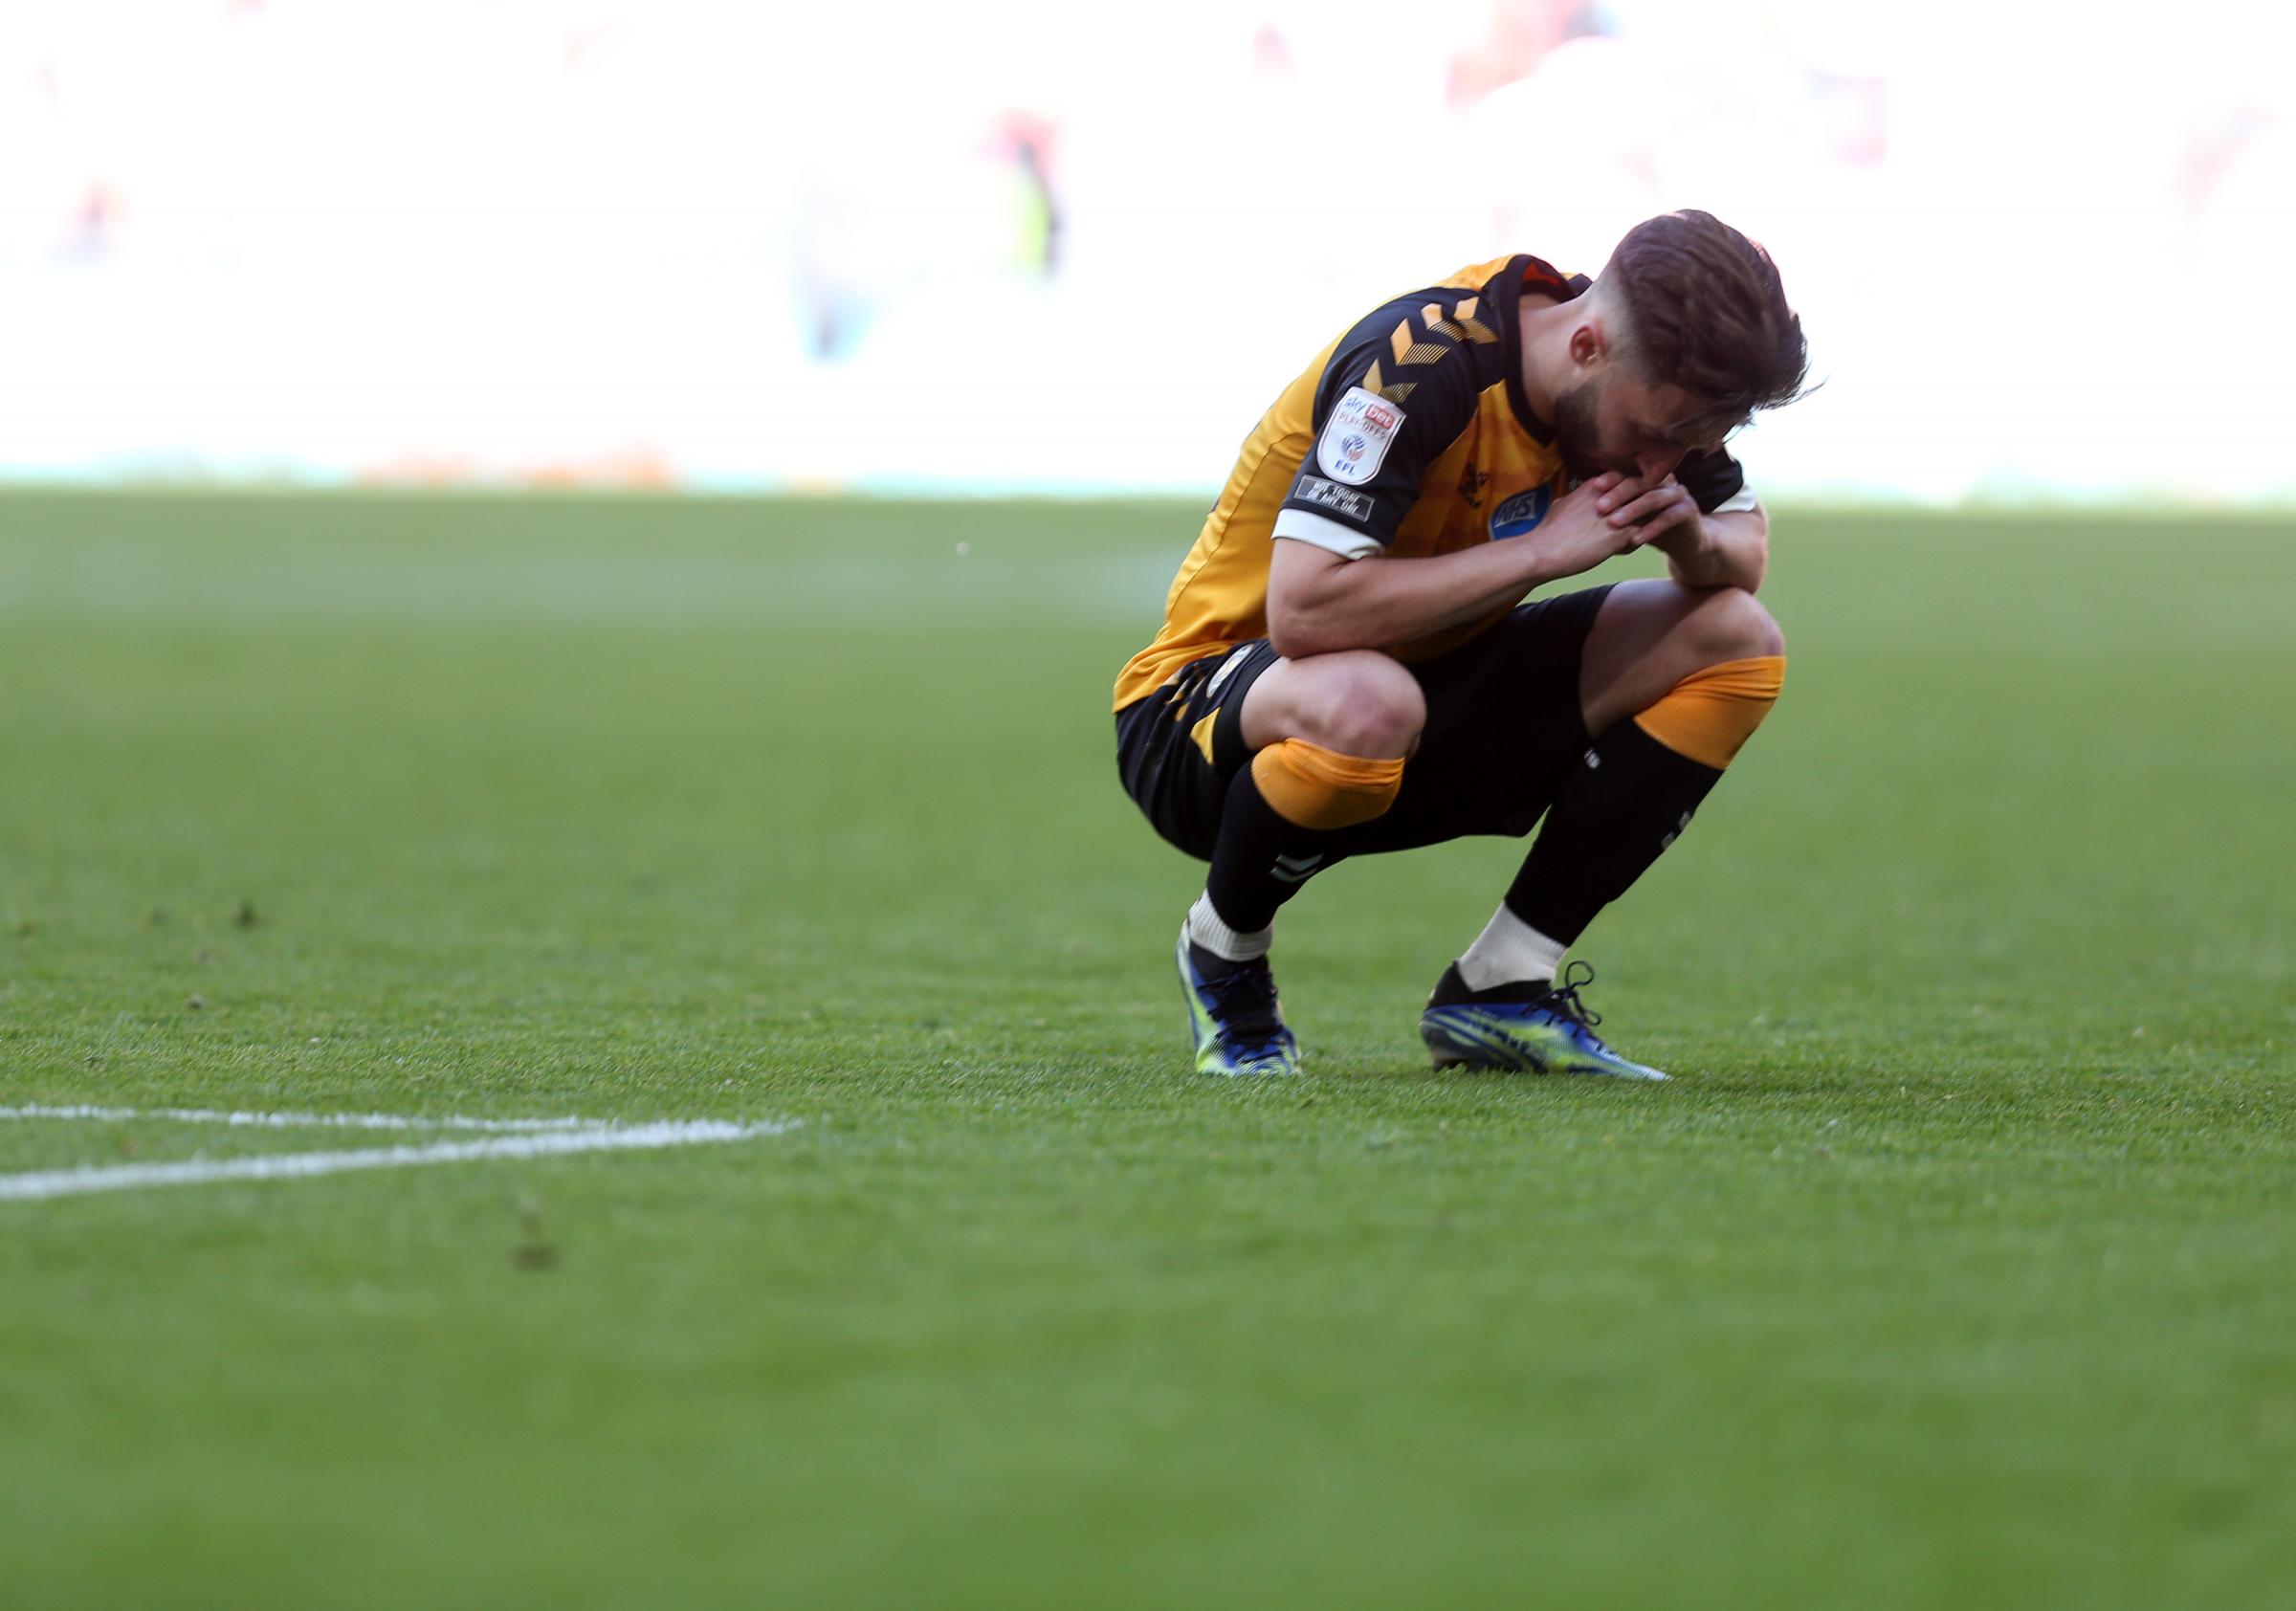 31.05.21 - Morecambe v Newport County, SkyBet League 2 Play Off Final - Dejected Josh Sheehan of Newport County at full time.